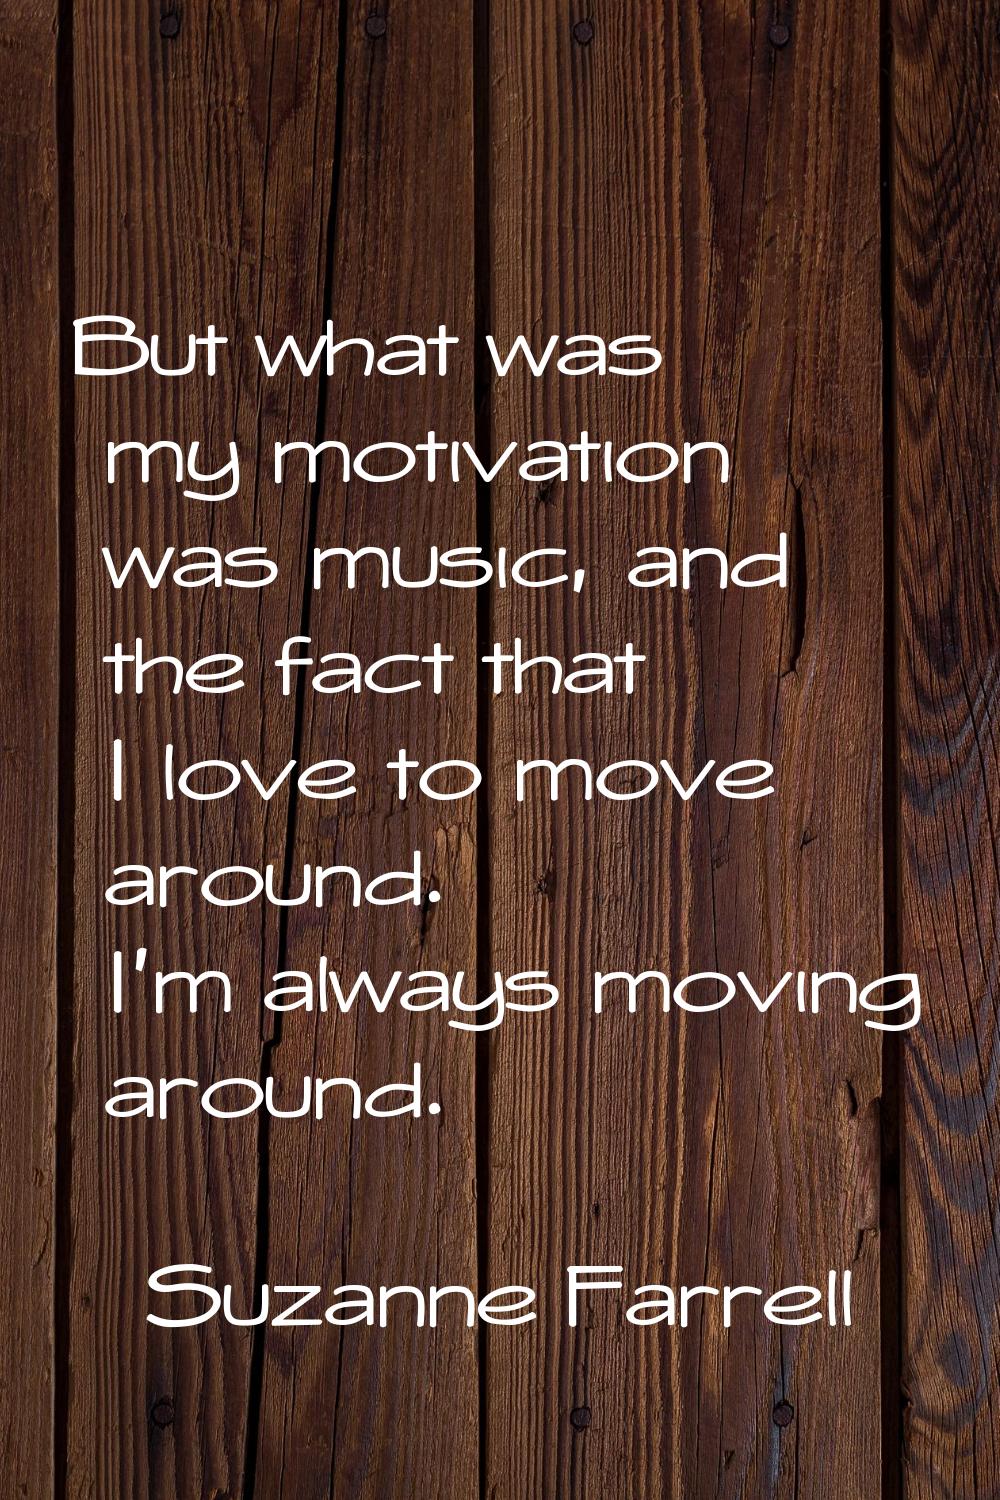 But what was my motivation was music, and the fact that I love to move around. I'm always moving ar